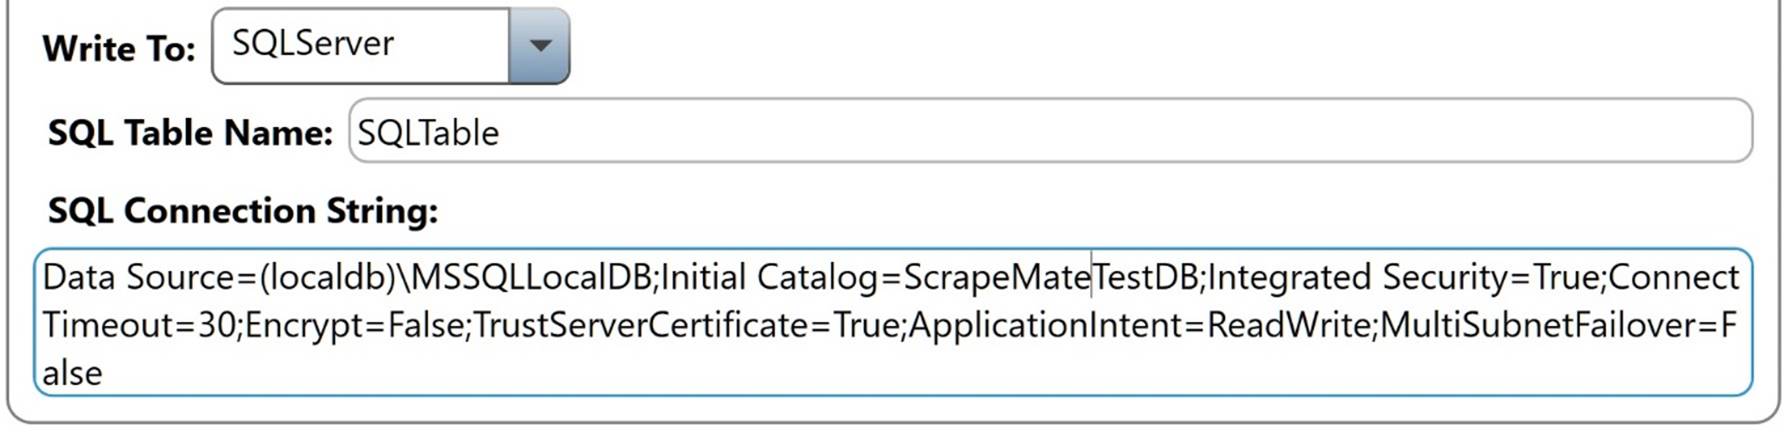 ScrapeMap Write Settings with Write To SQLServer selected